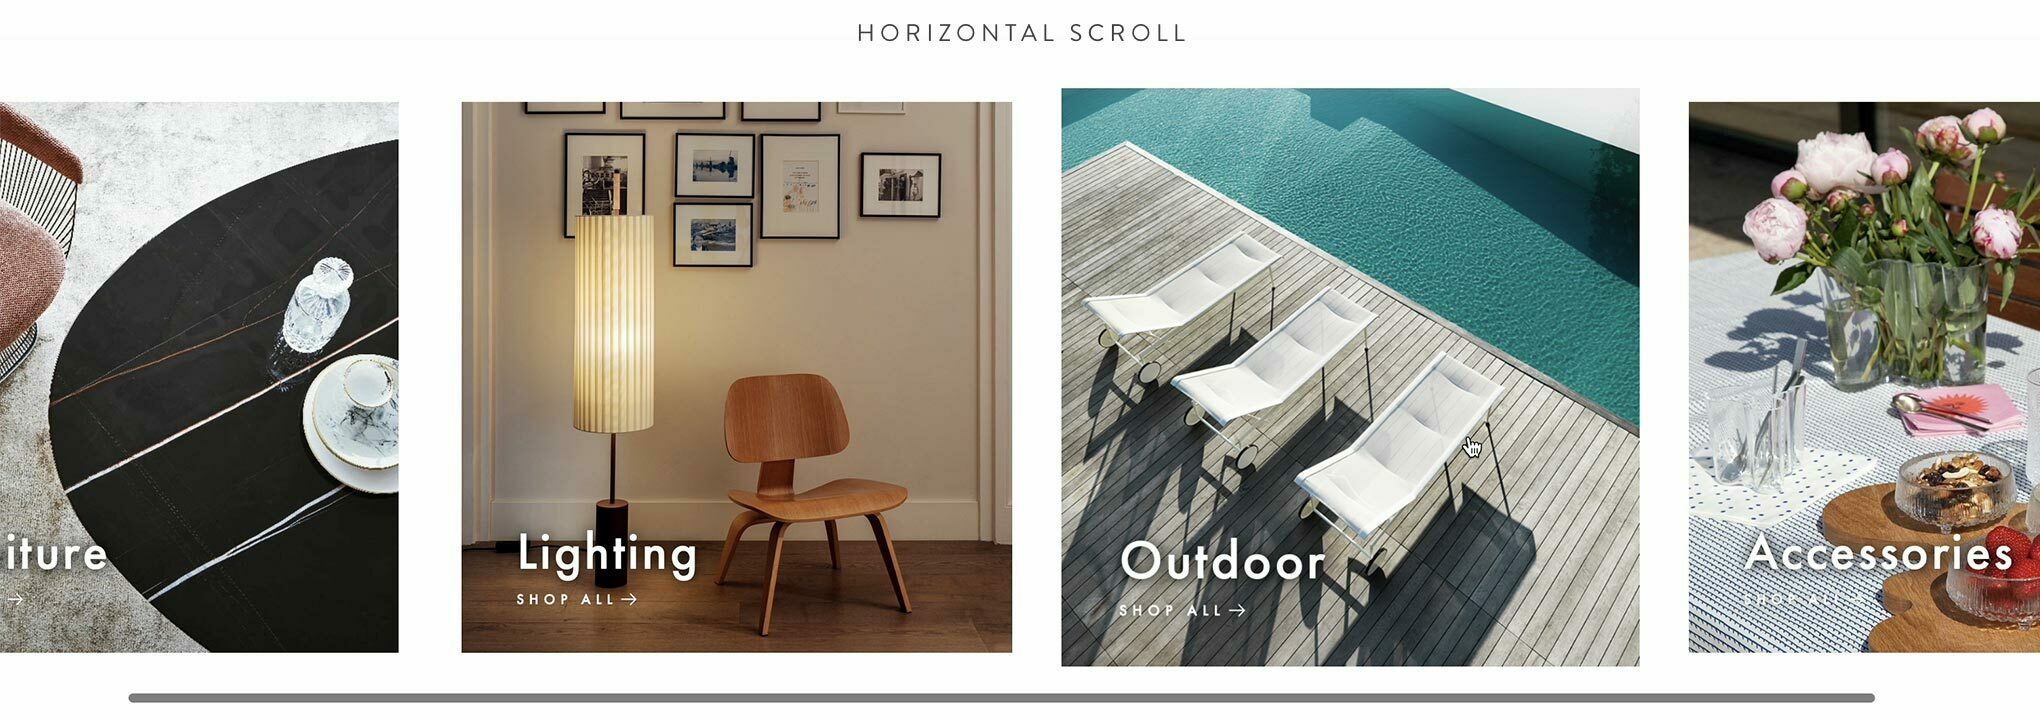 Horizontal scrolling area of the product categories on Designcollectors website